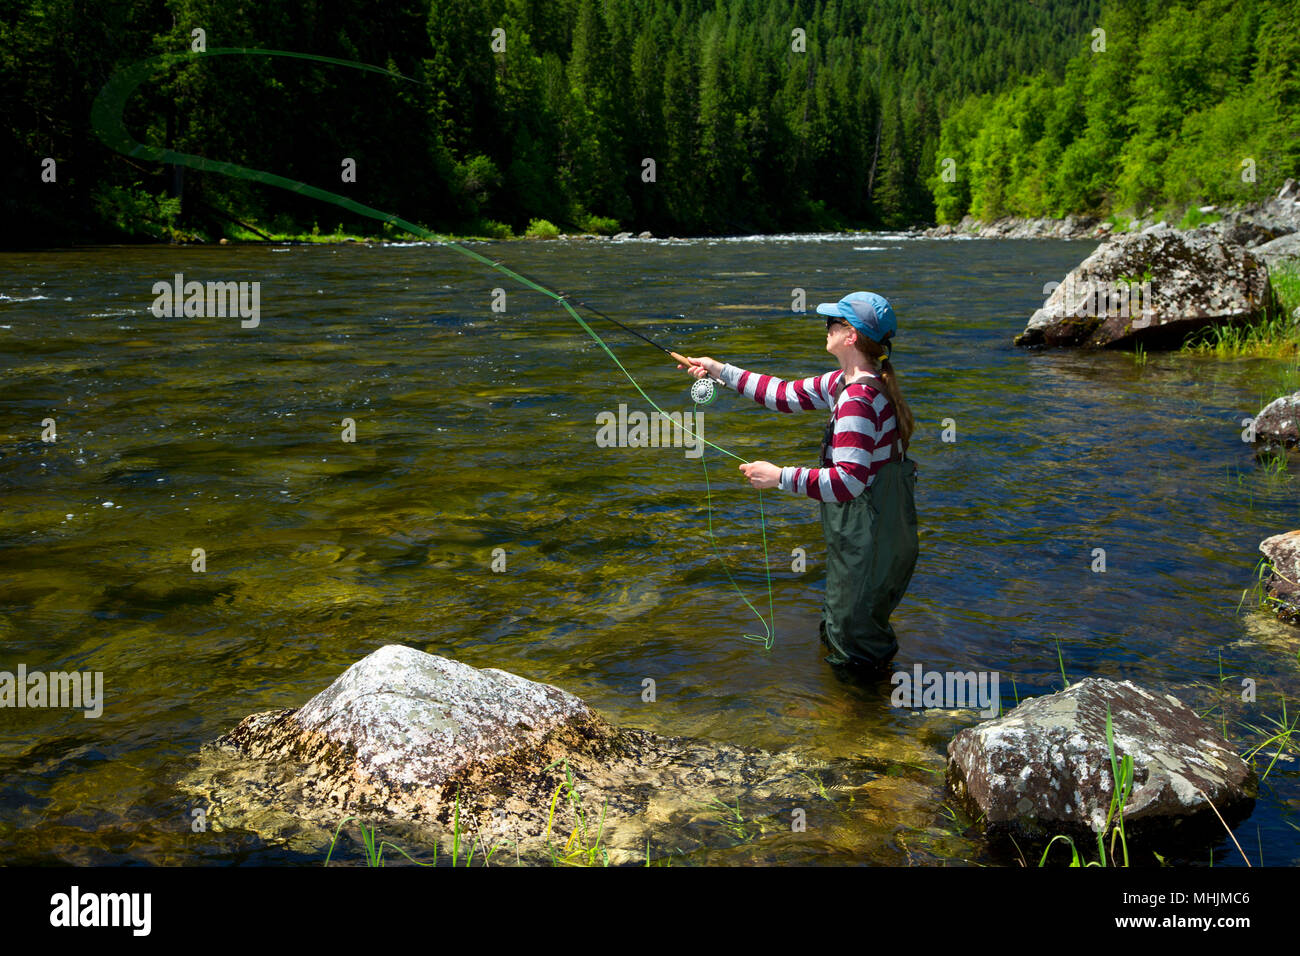 Flyfishing, Lochsa Wild and Scenic River, Northwest Passage Scenic Byway, Clearwater National Forest, Idaho Stock Photo